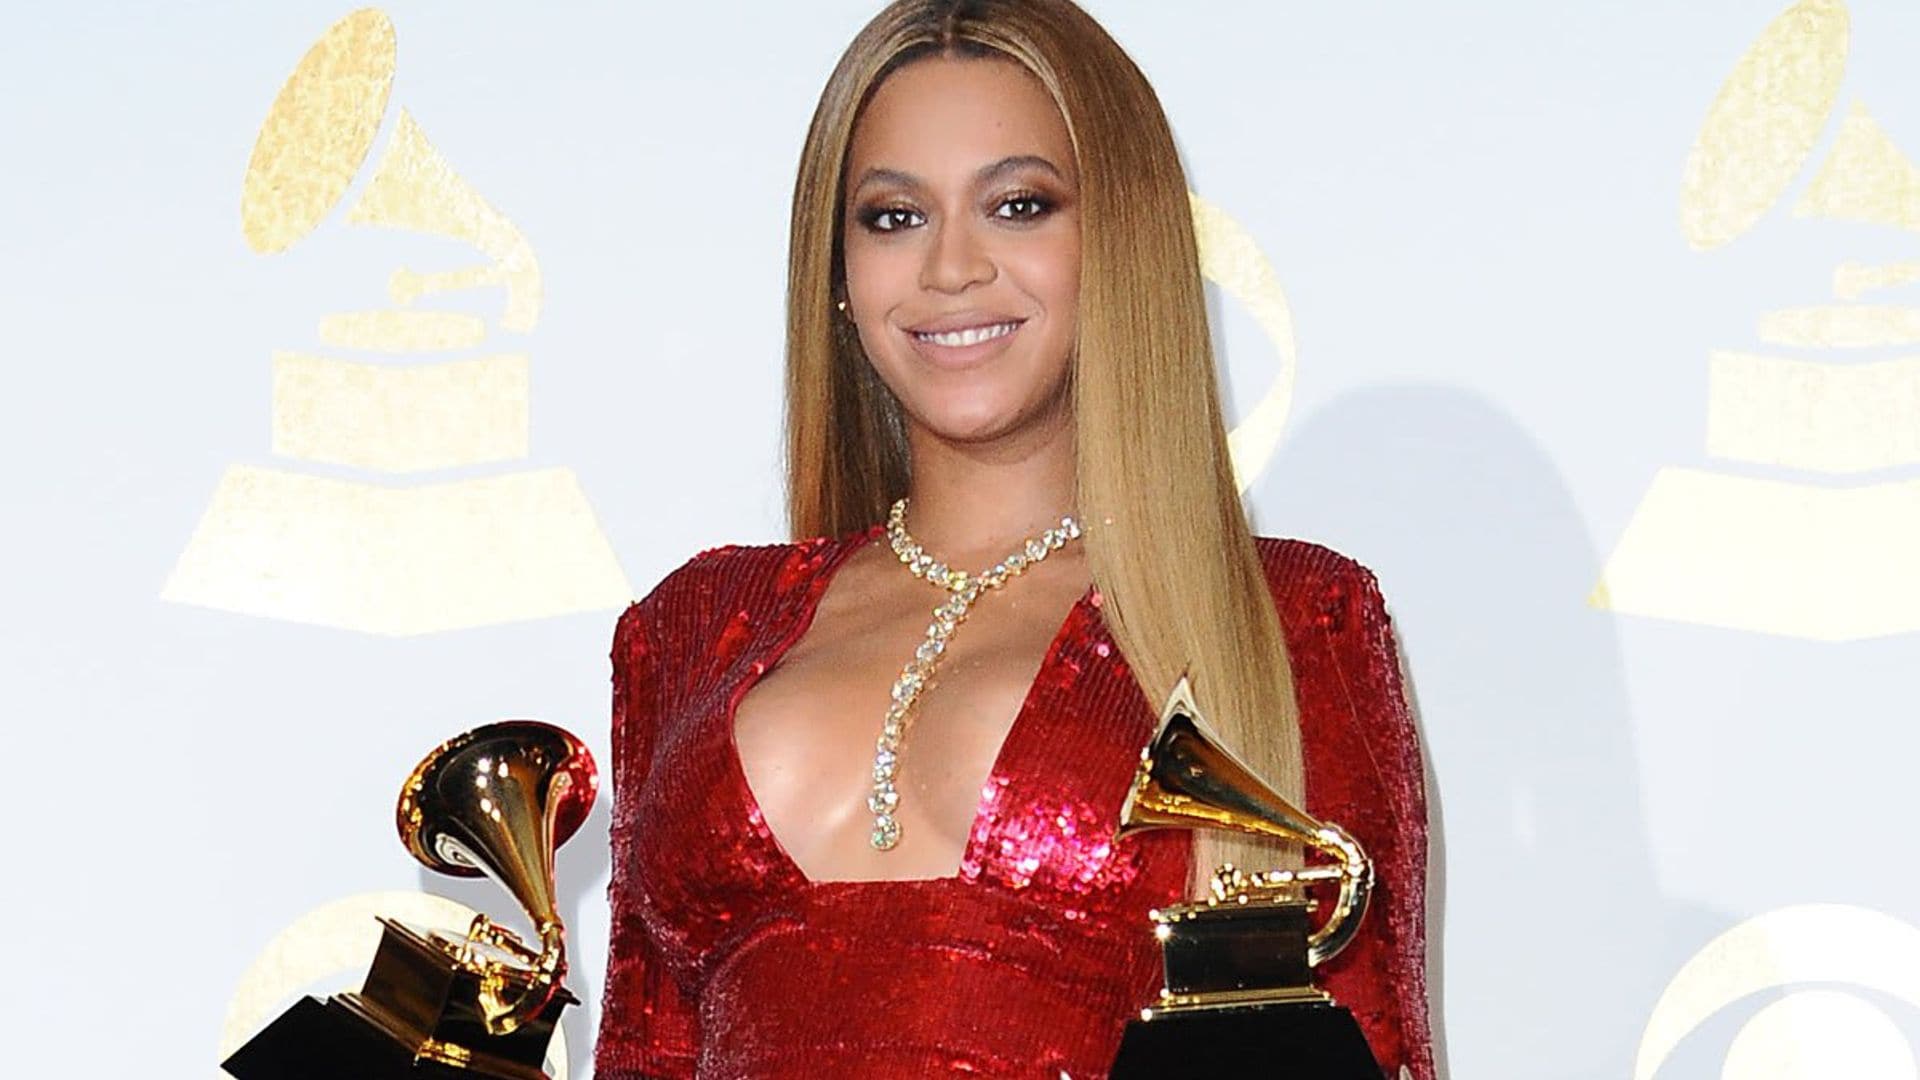 Beyoncé says no to performing in 2021 Grammys, but it could be her biggest year yet